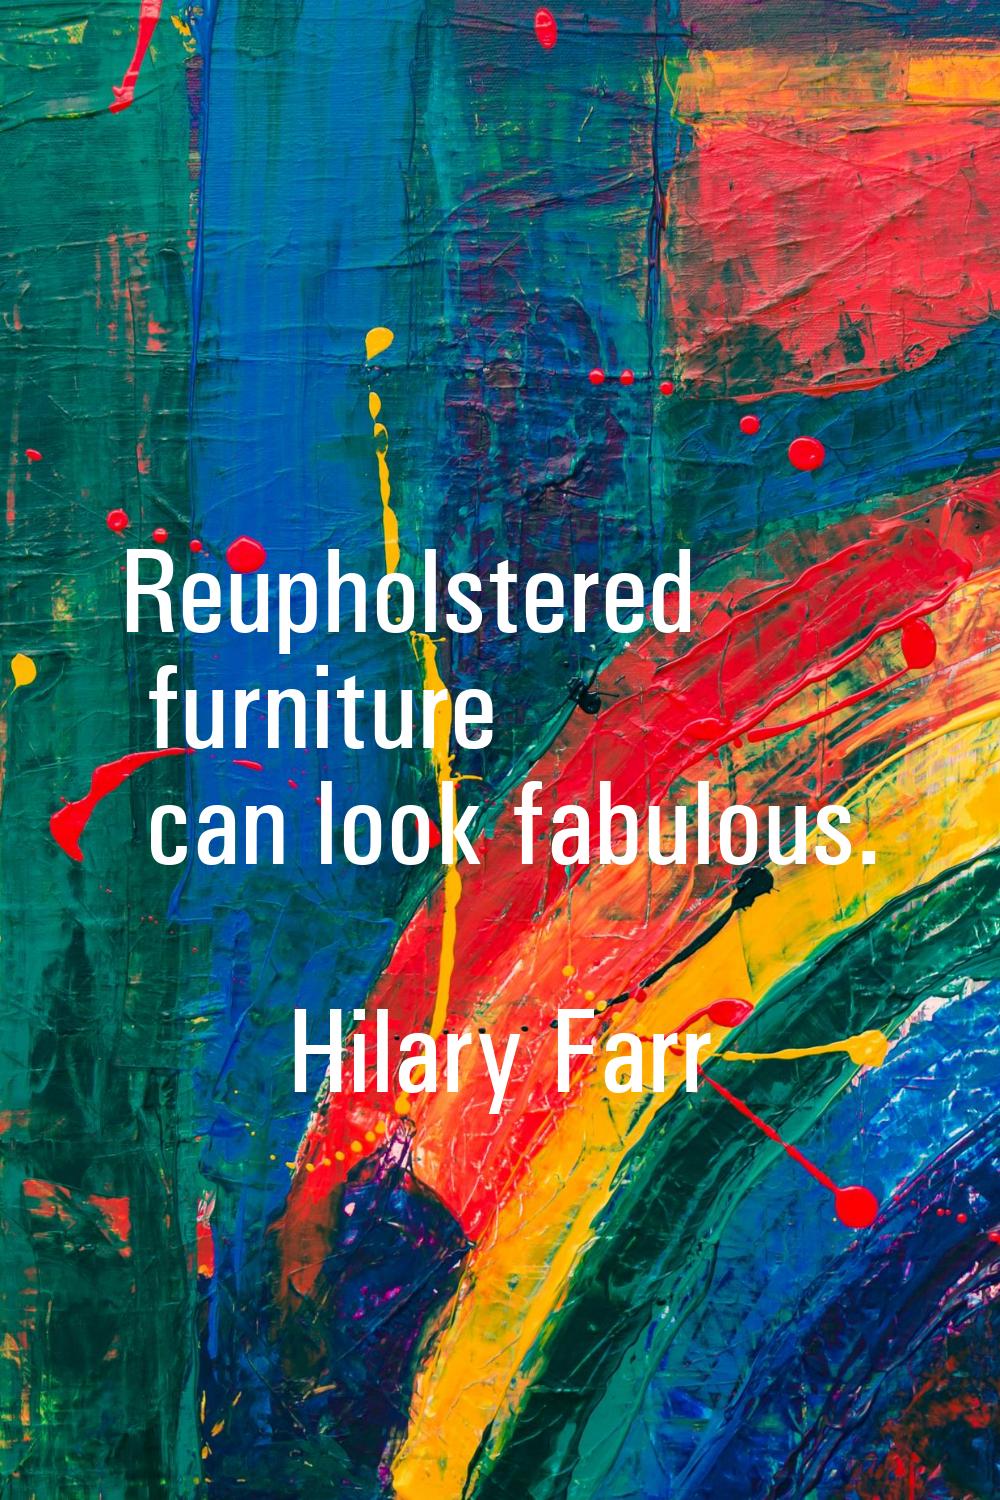 Reupholstered furniture can look fabulous.